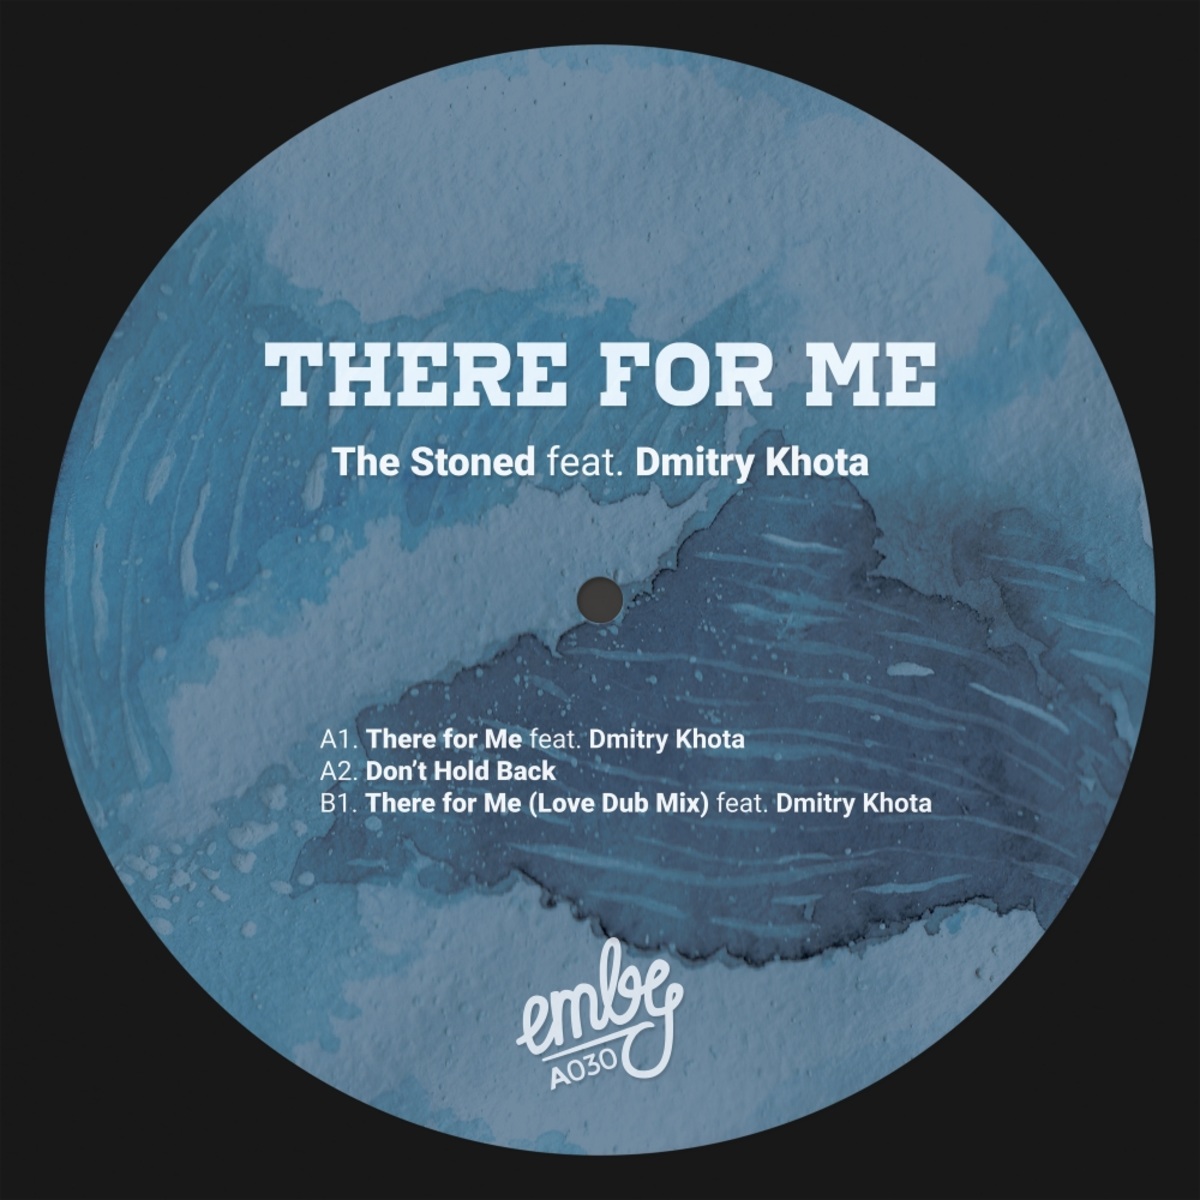 The Stoned - There For Me EP / Emby